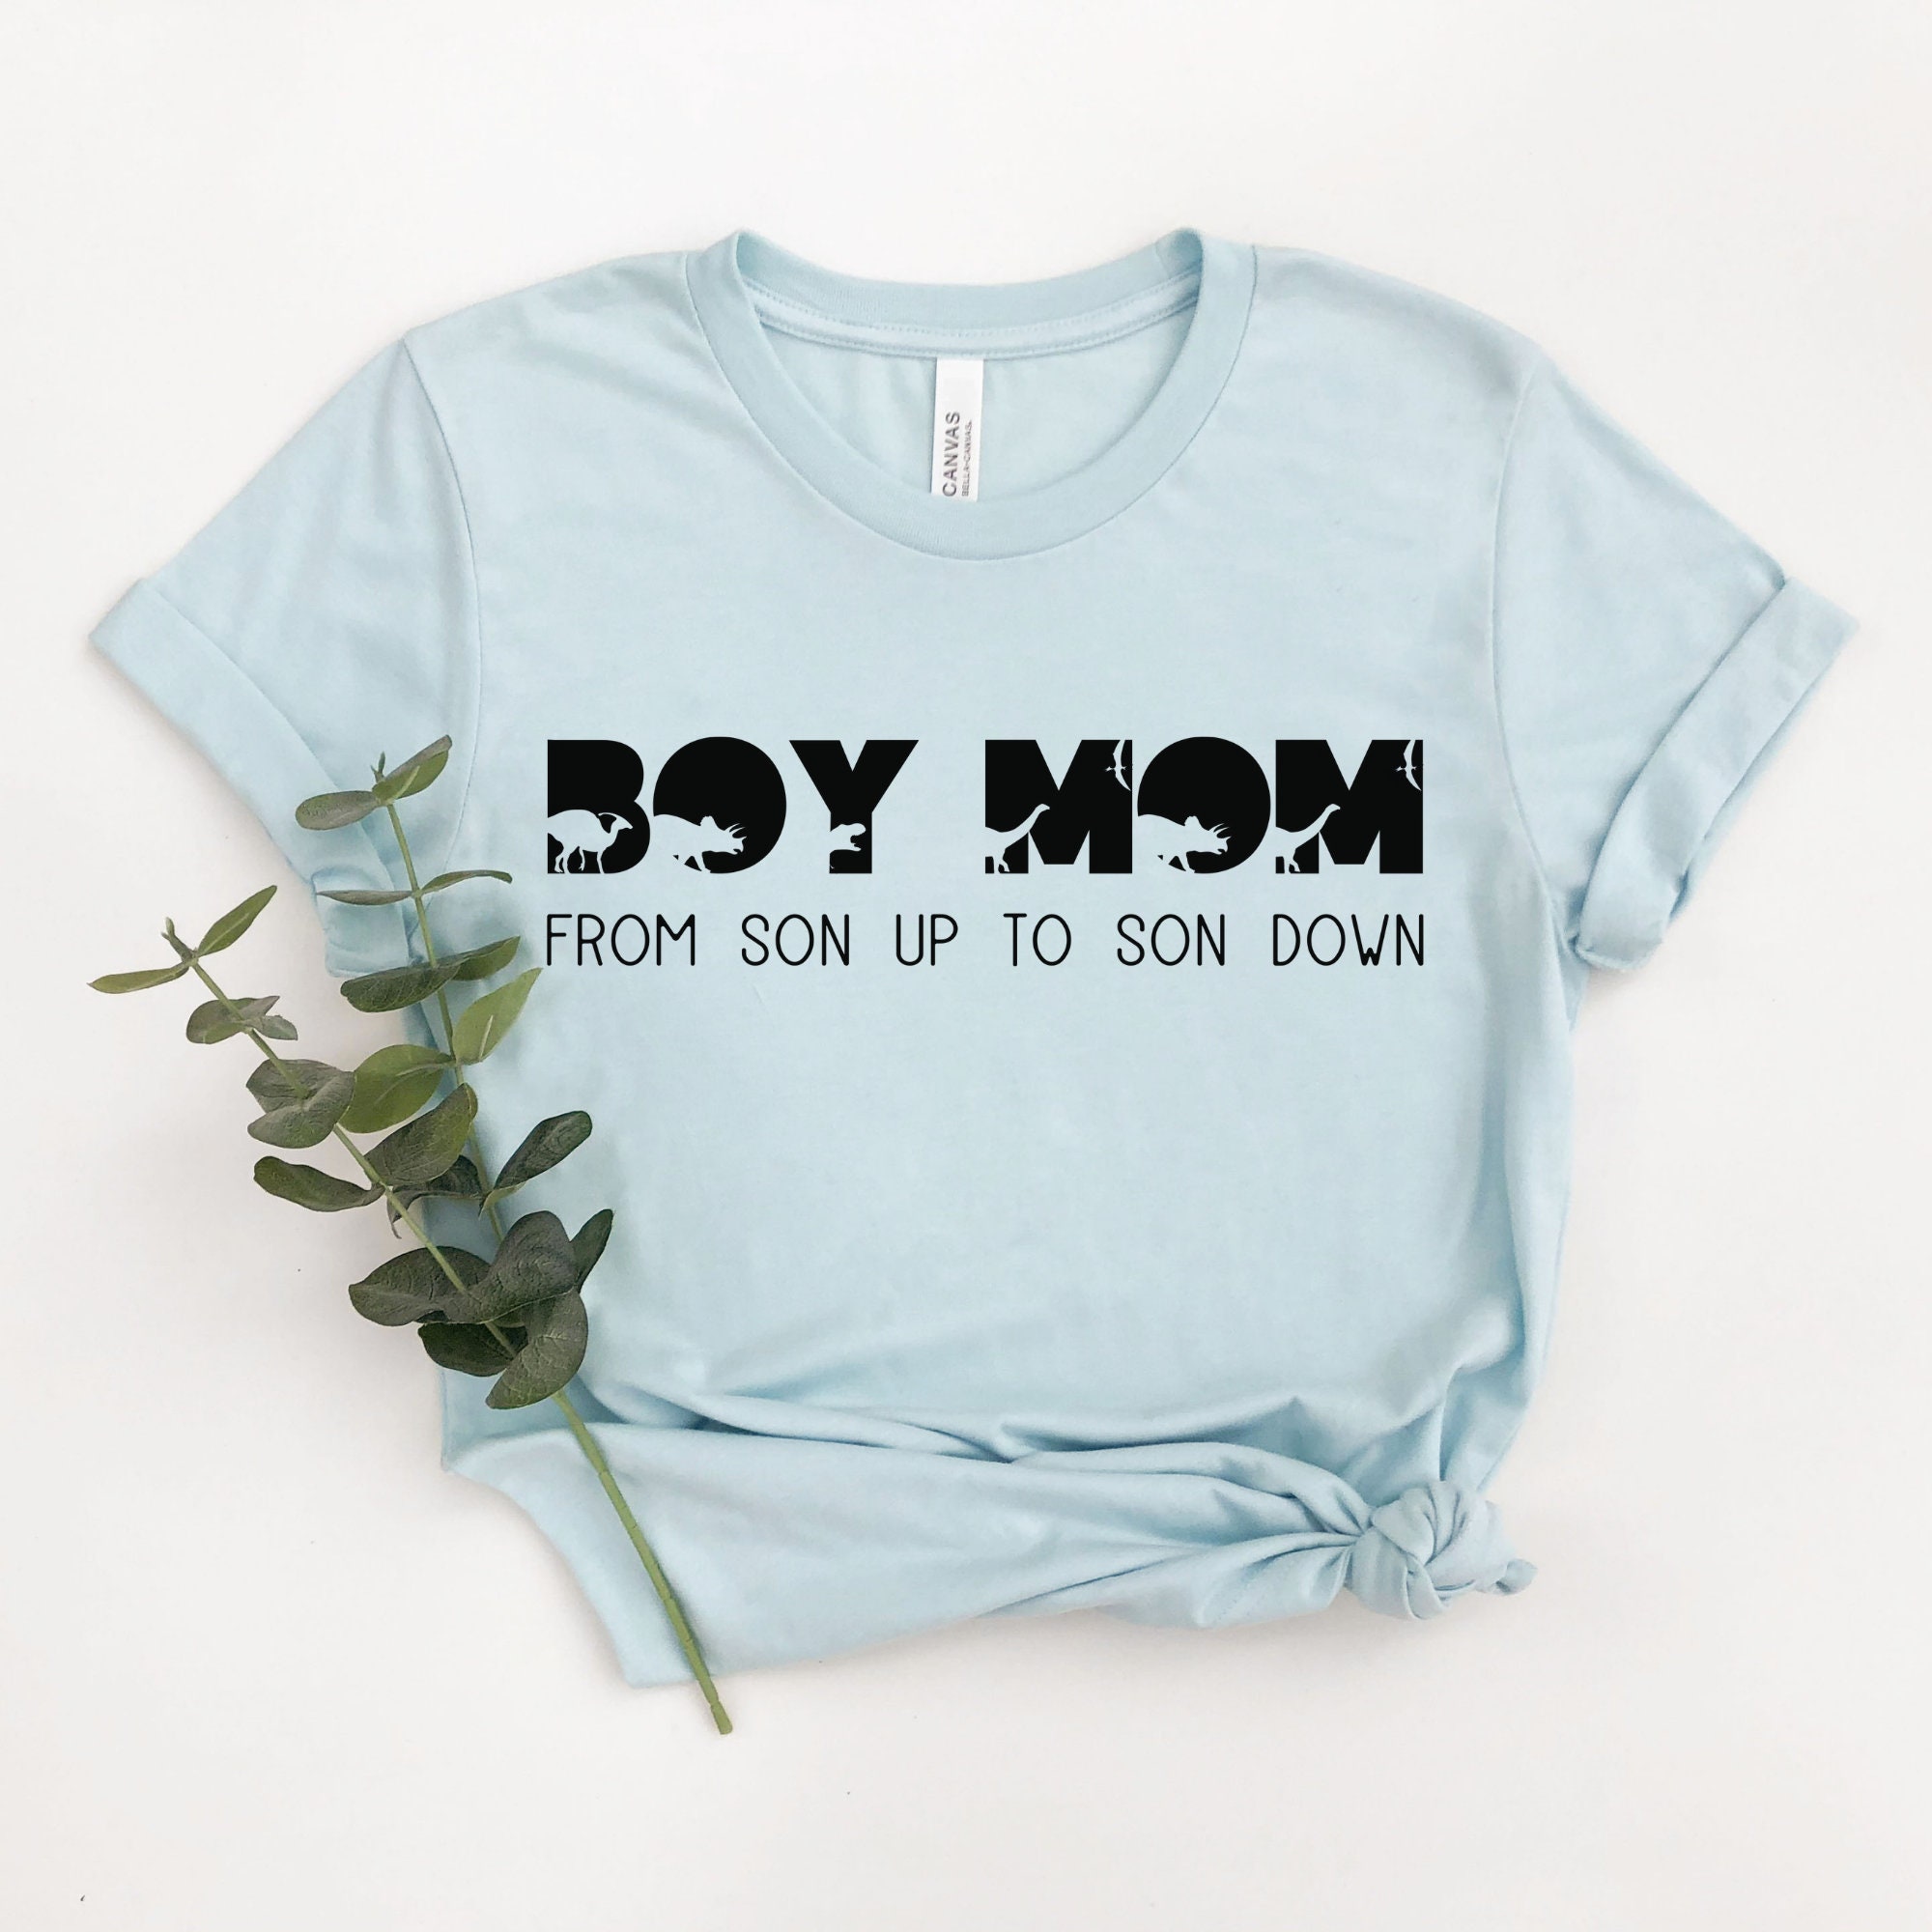 Boy Mom from Son up to Son Down Sweatshirt ORDERS placed after 1211 are not GUARANTEED for XMAS delivery